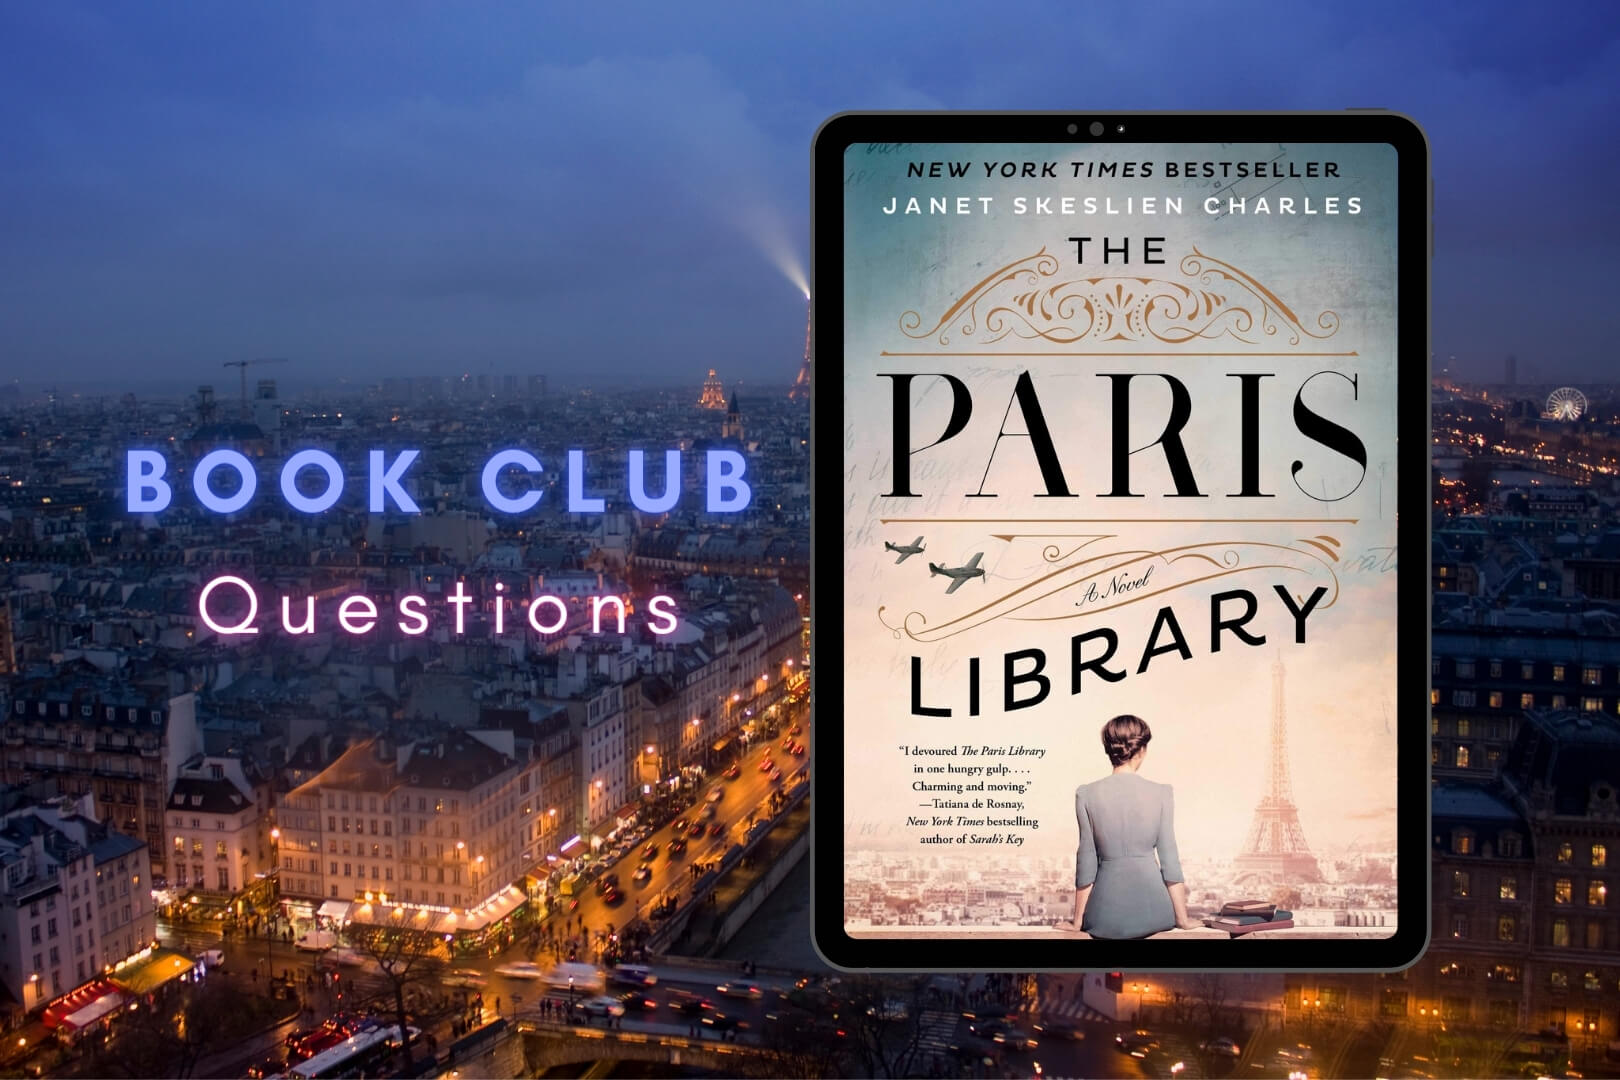 Book Club Questions for The Paris Library by Janet Skeslien Charles